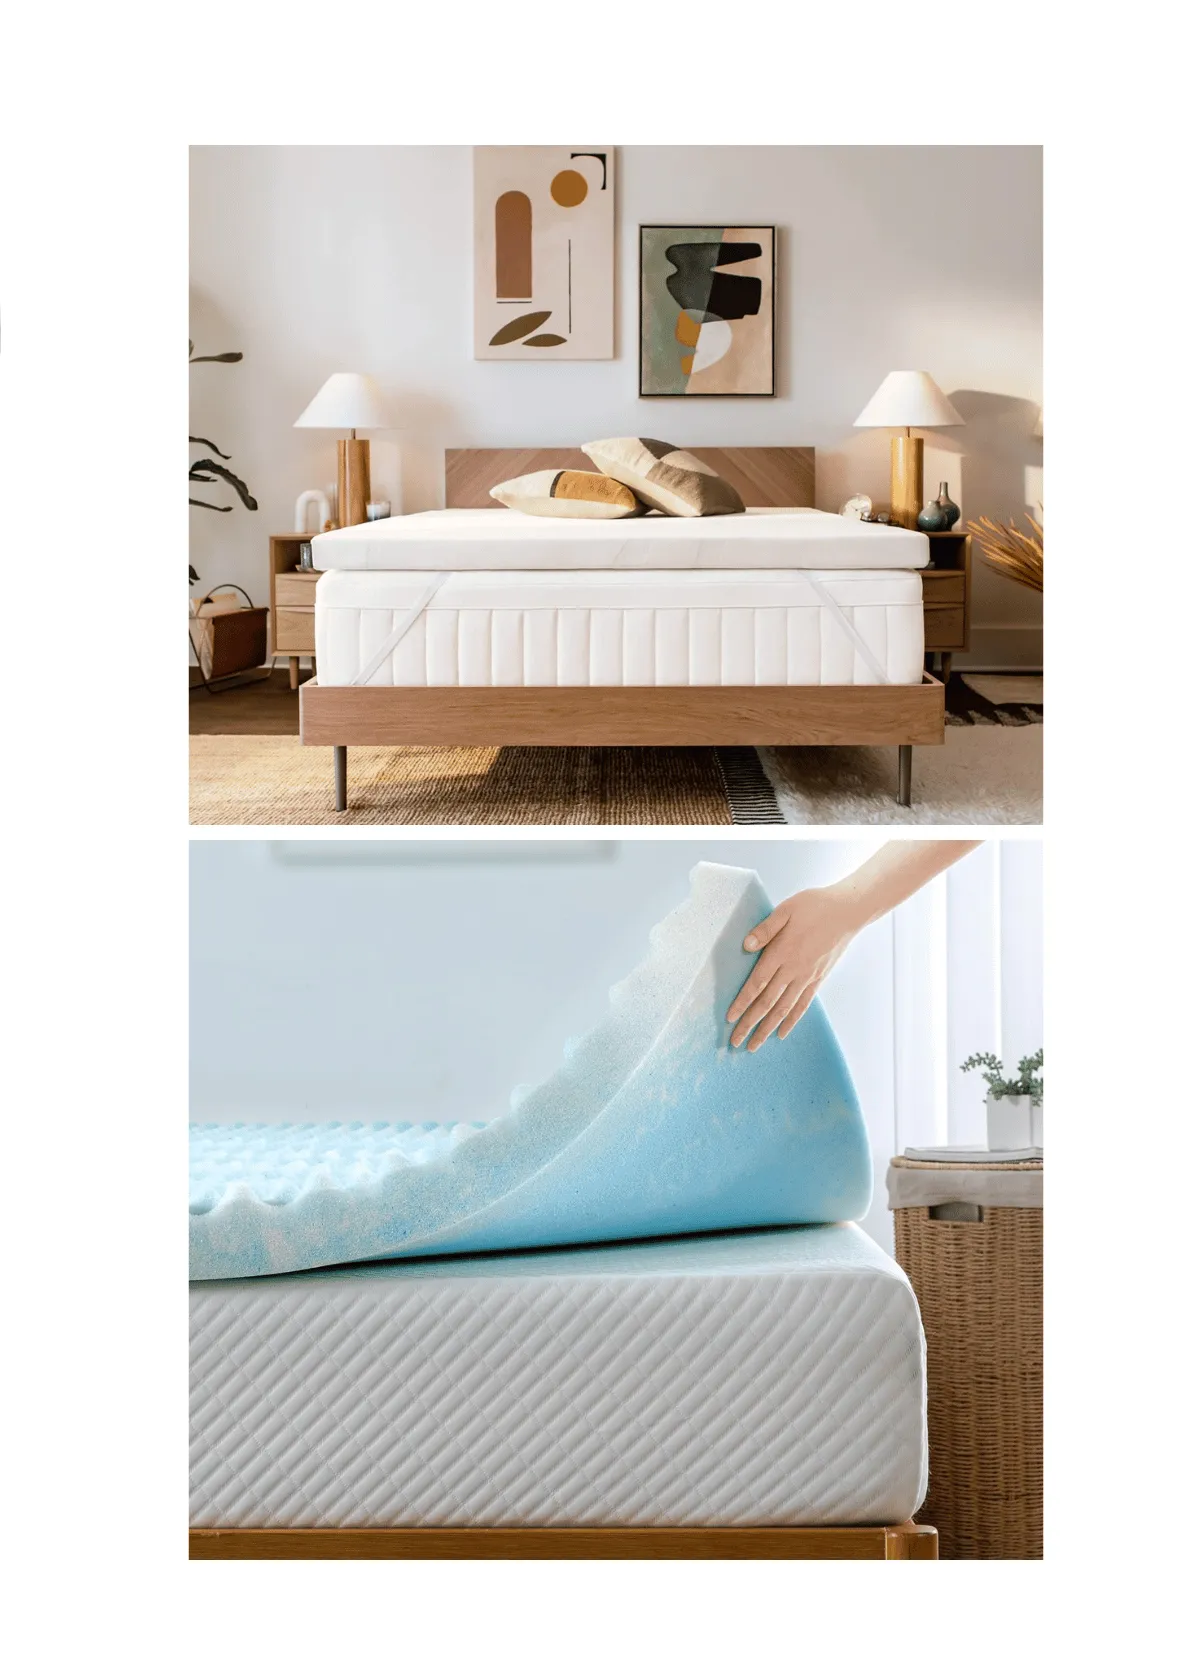 "Mattress Topper | Turn Your Sleepless Nights Into a Cool Slumber"